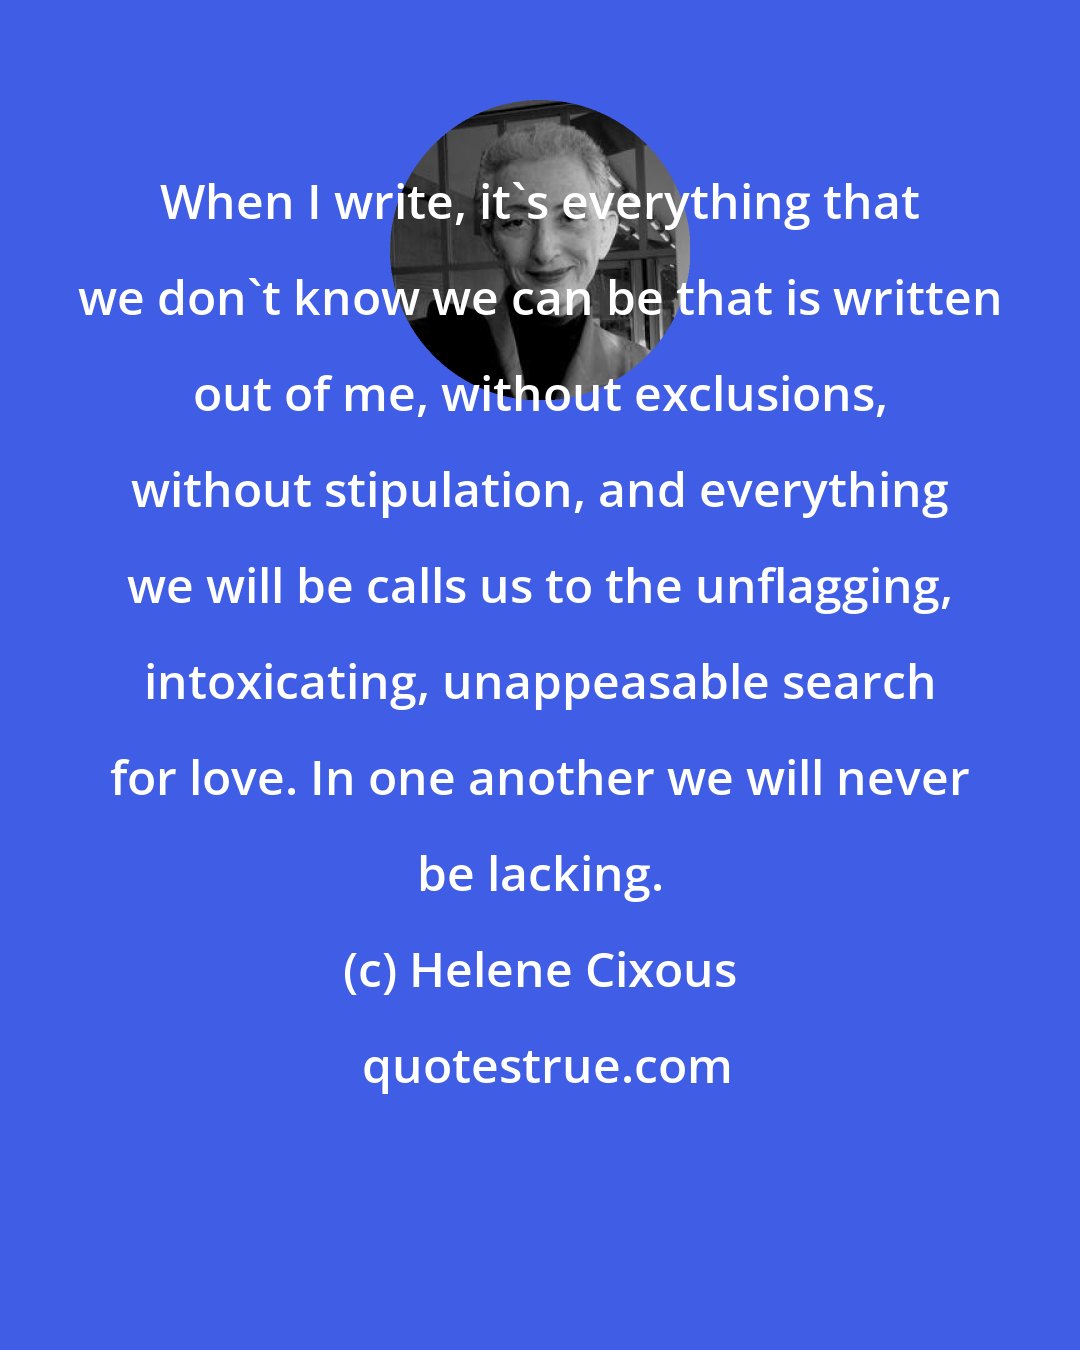 Helene Cixous: When I write, it's everything that we don't know we can be that is written out of me, without exclusions, without stipulation, and everything we will be calls us to the unflagging, intoxicating, unappeasable search for love. In one another we will never be lacking.